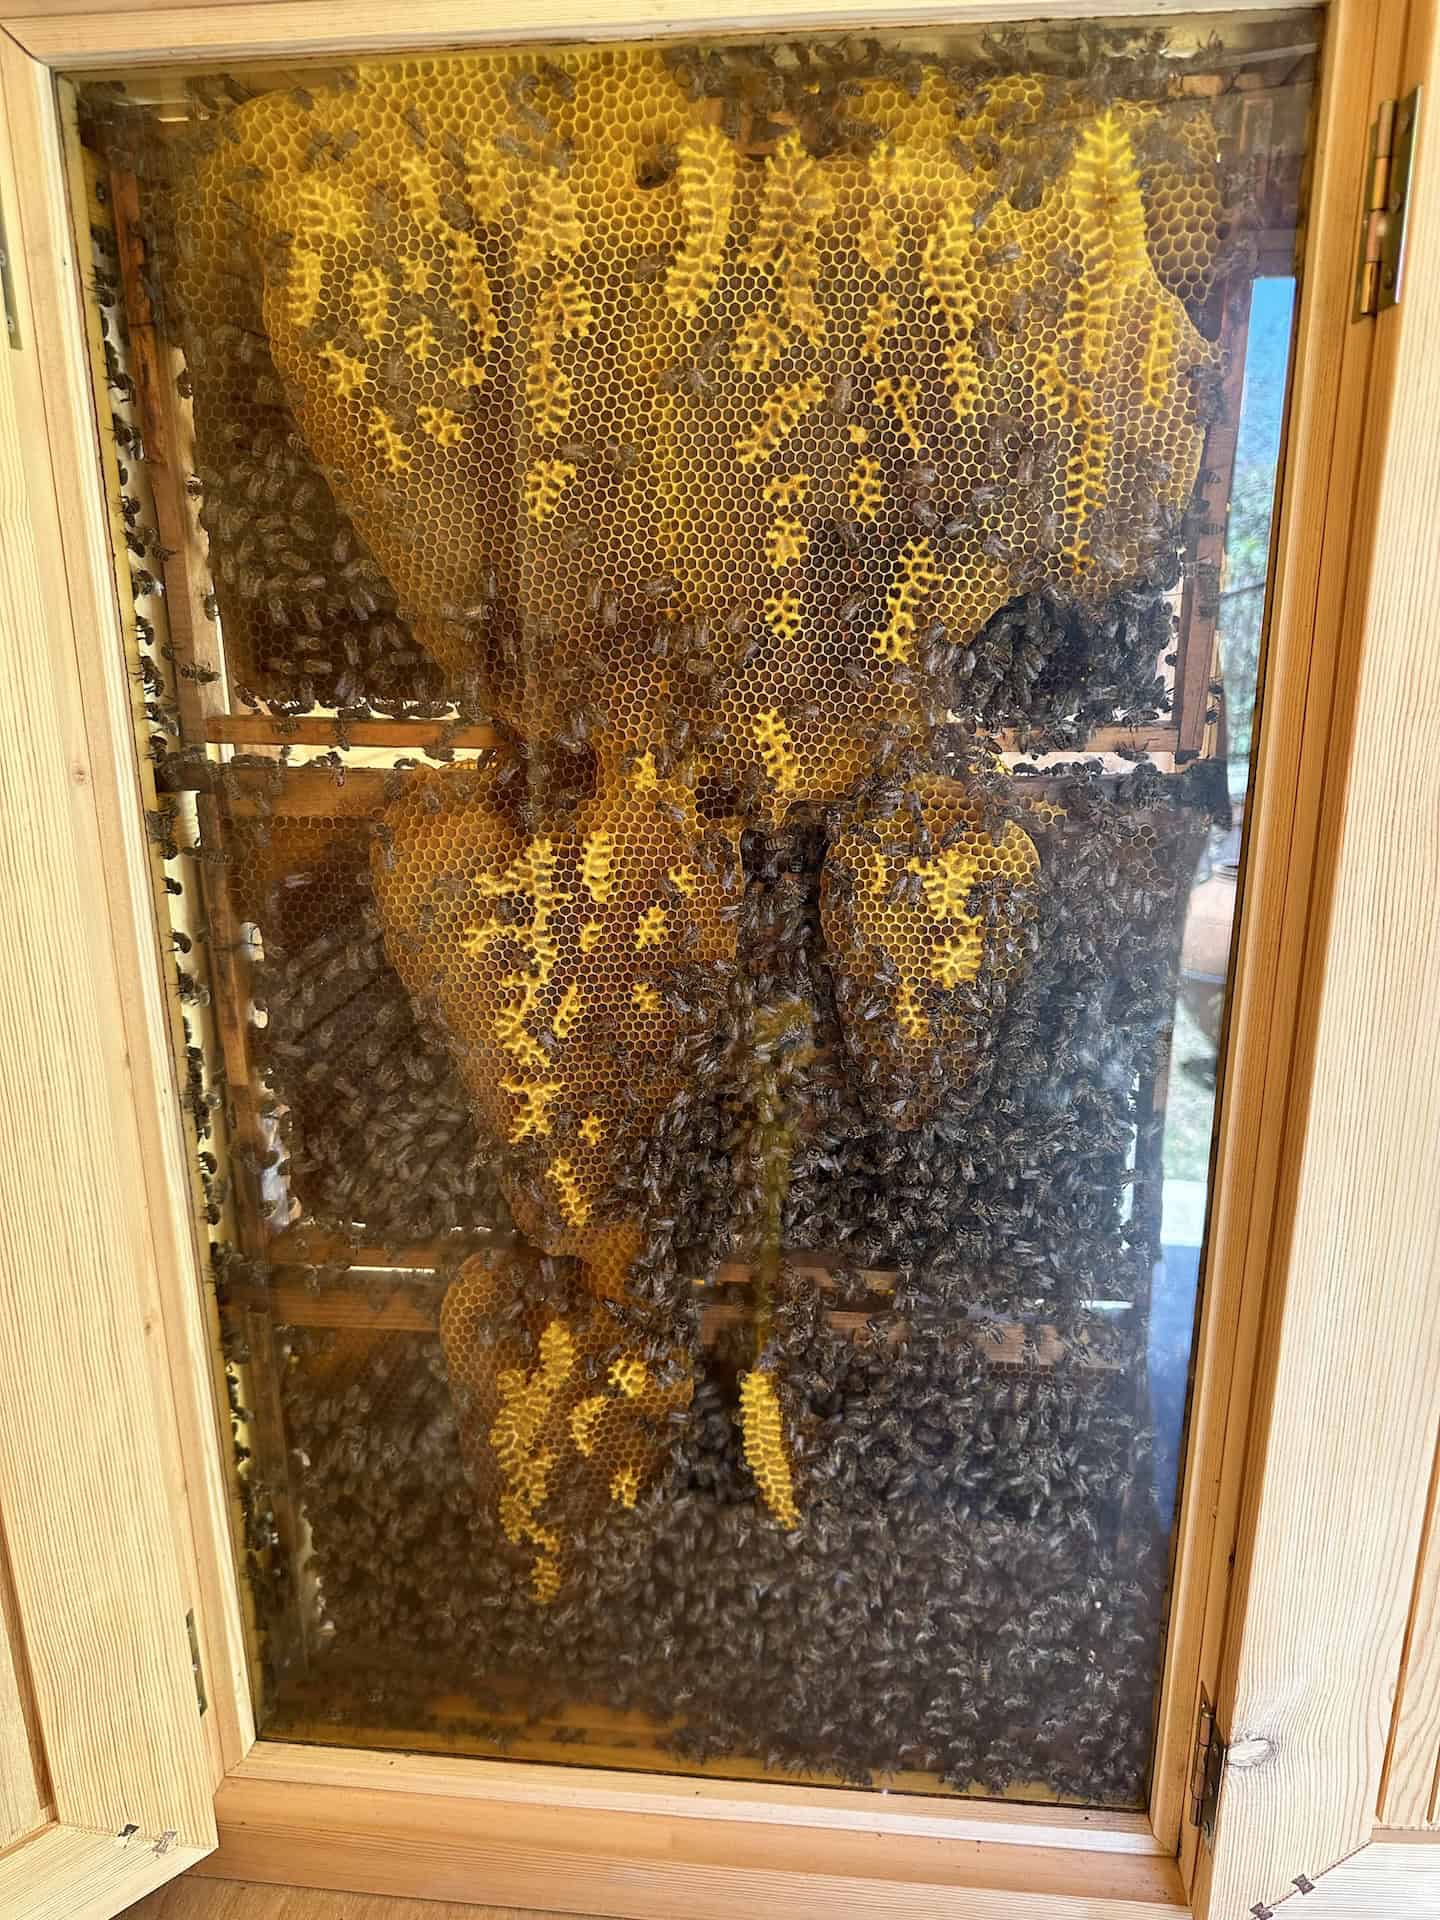 Beehive in the modern beekeeper's shack at the Marmaris Honey House